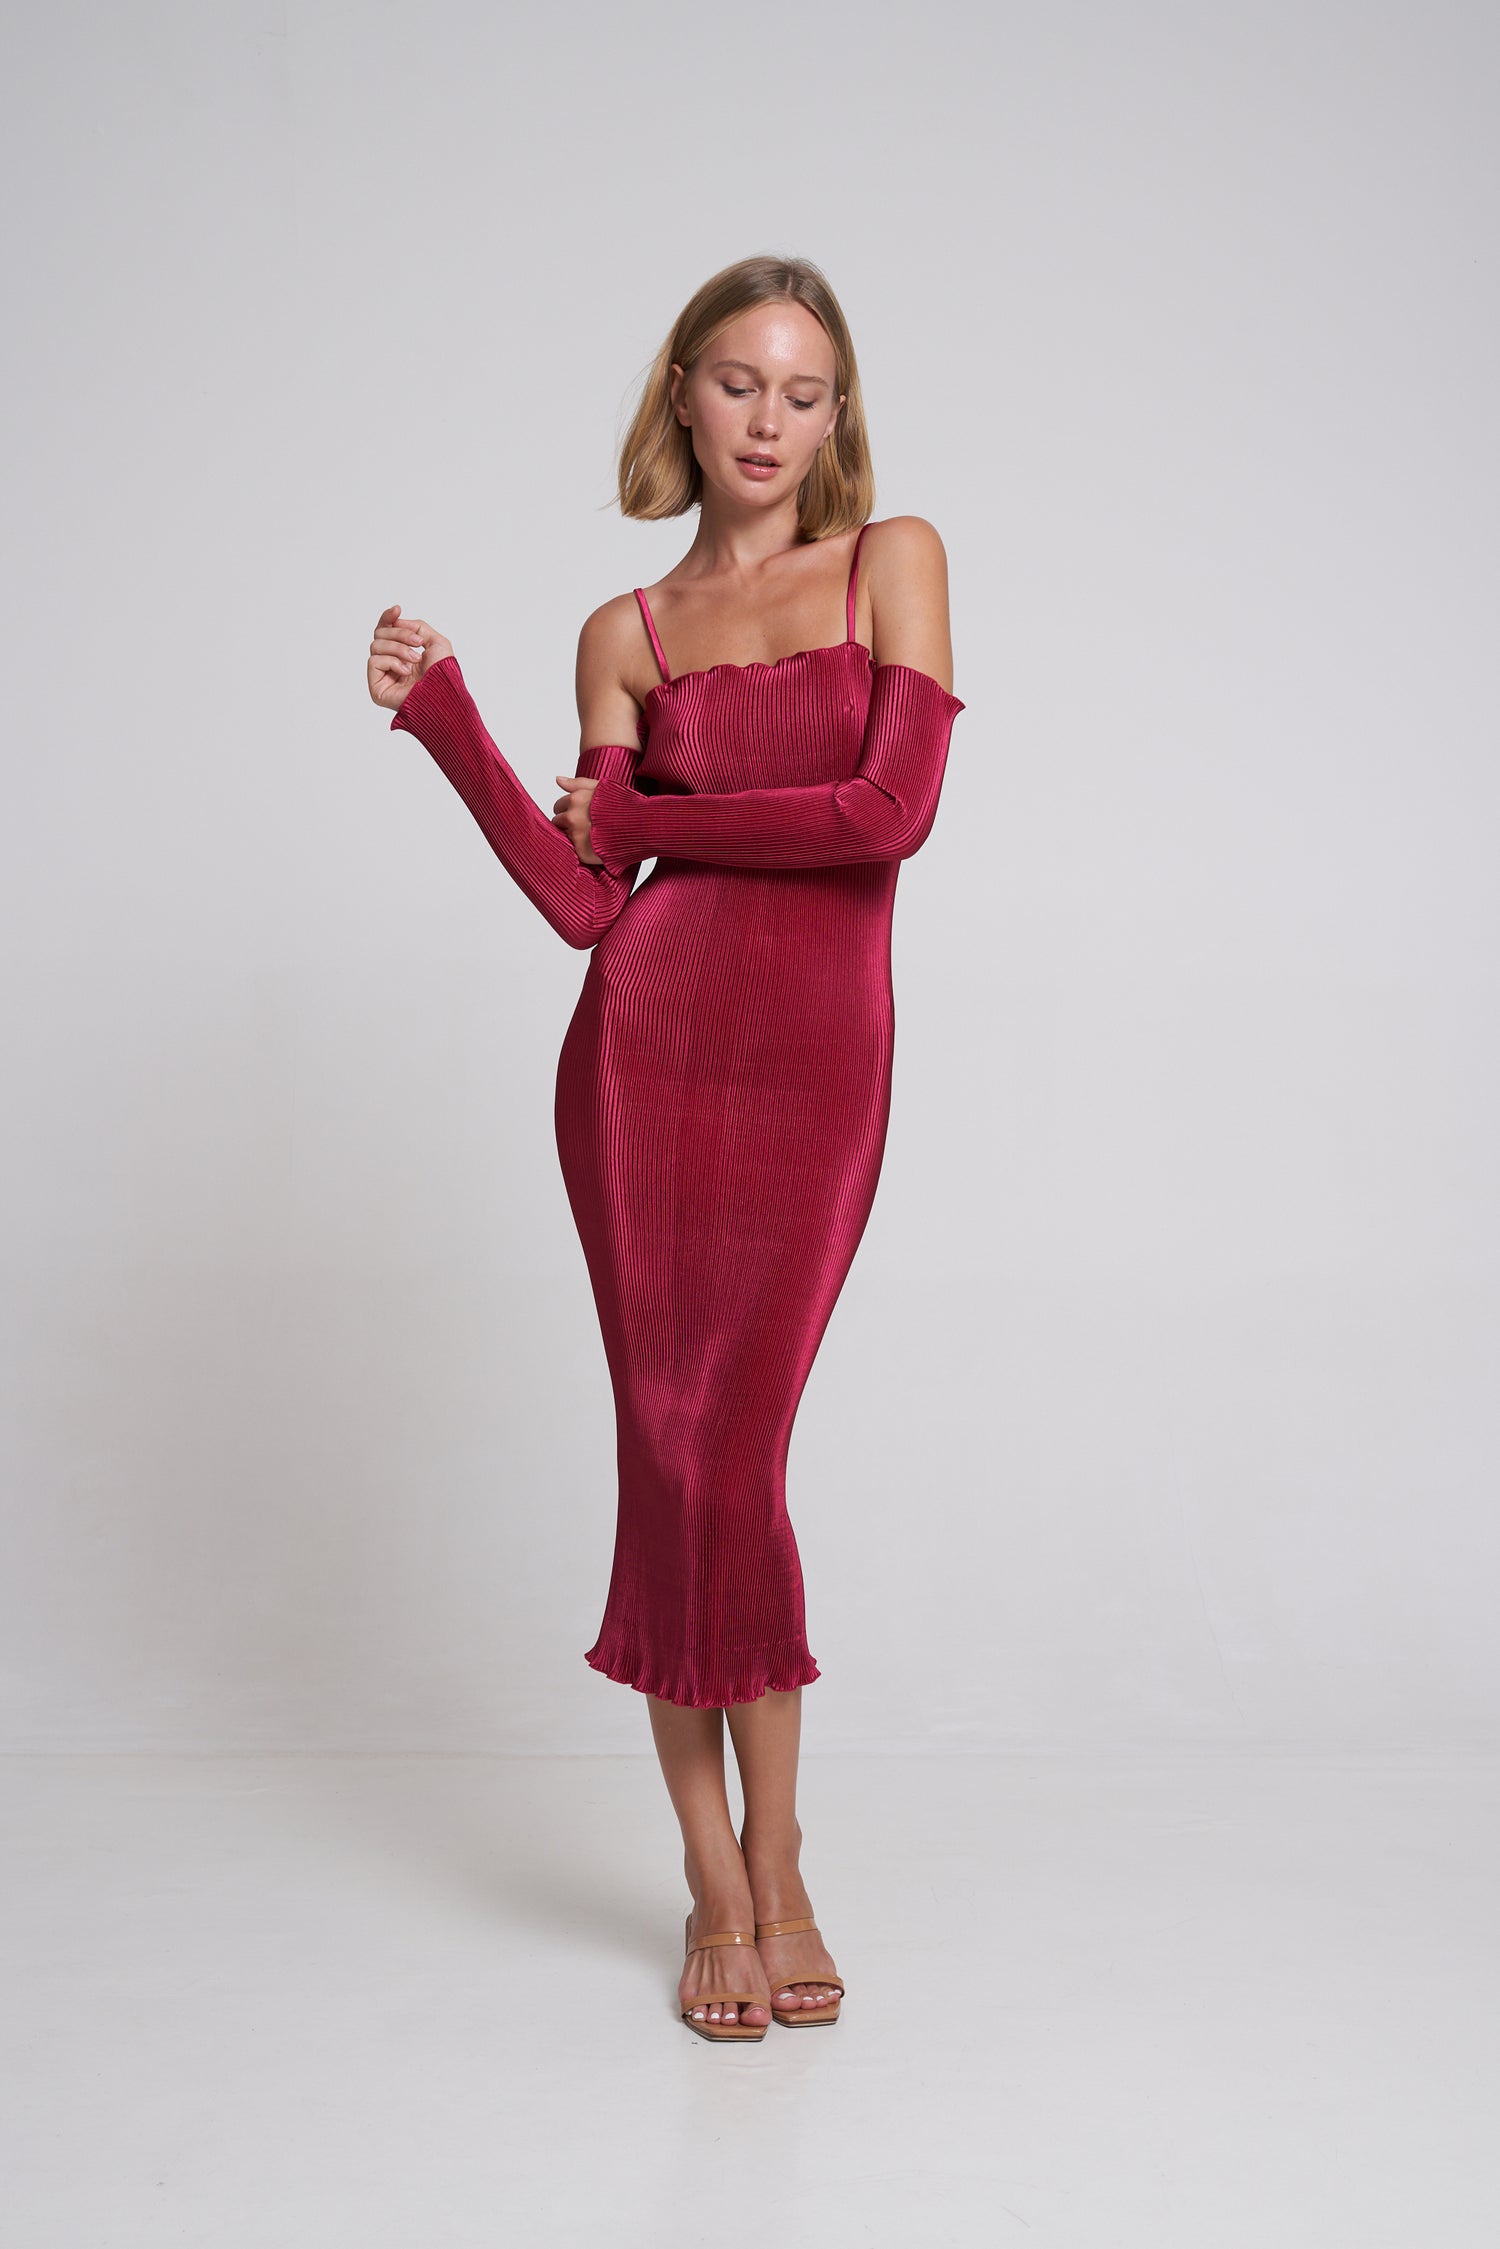 Le Cocktail Dress - Ruby